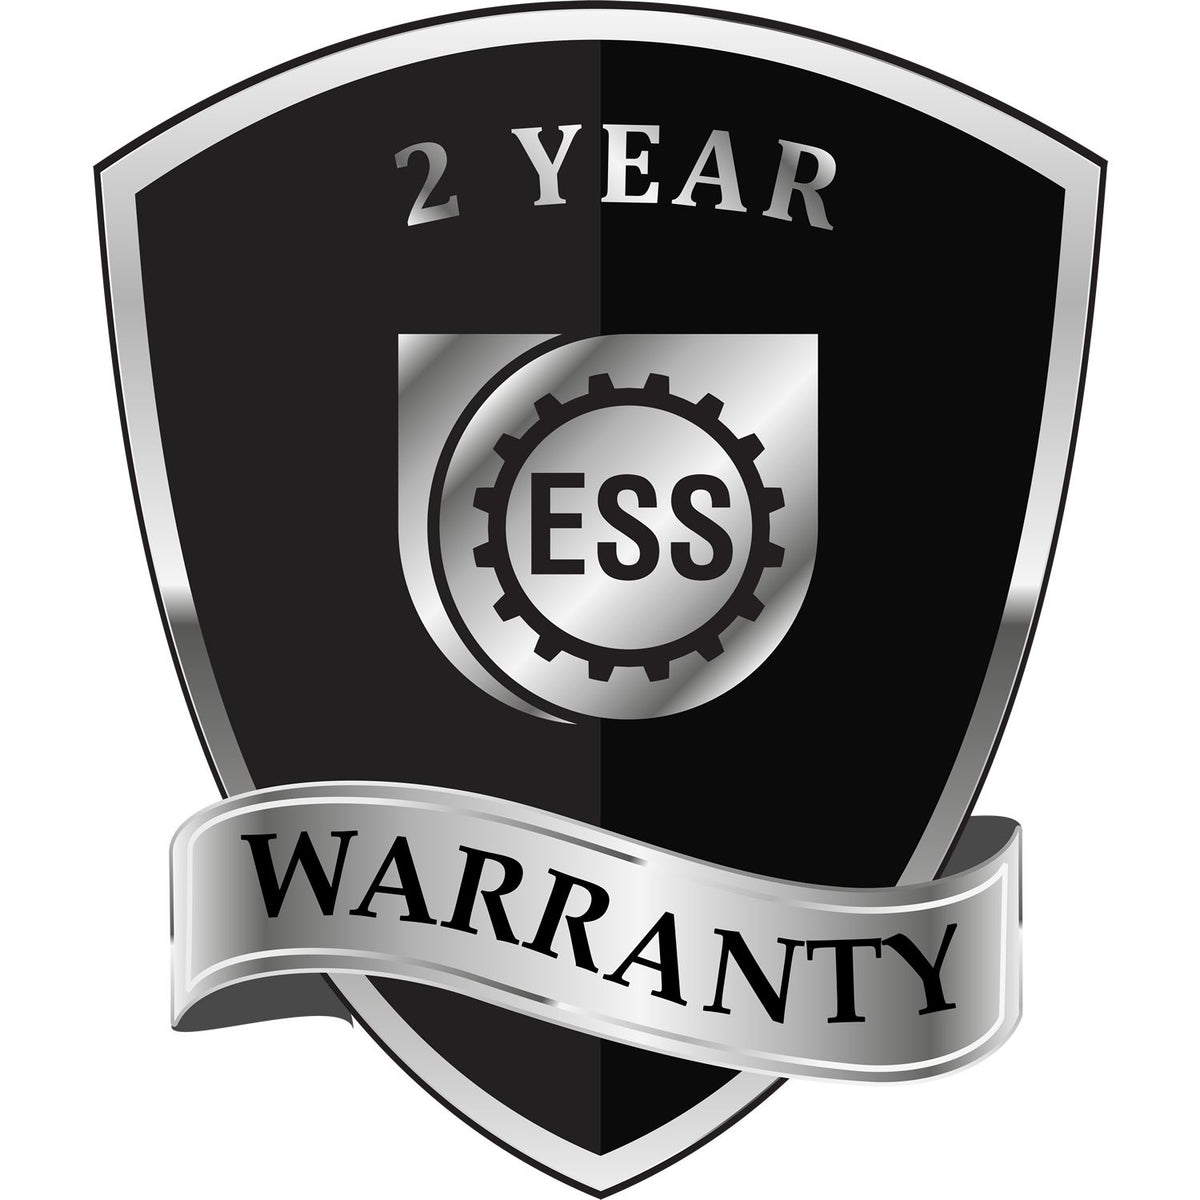 A black and silver badge or emblem showing warranty information for the Heavy Duty Cast Iron North Carolina Geologist Seal Embosser